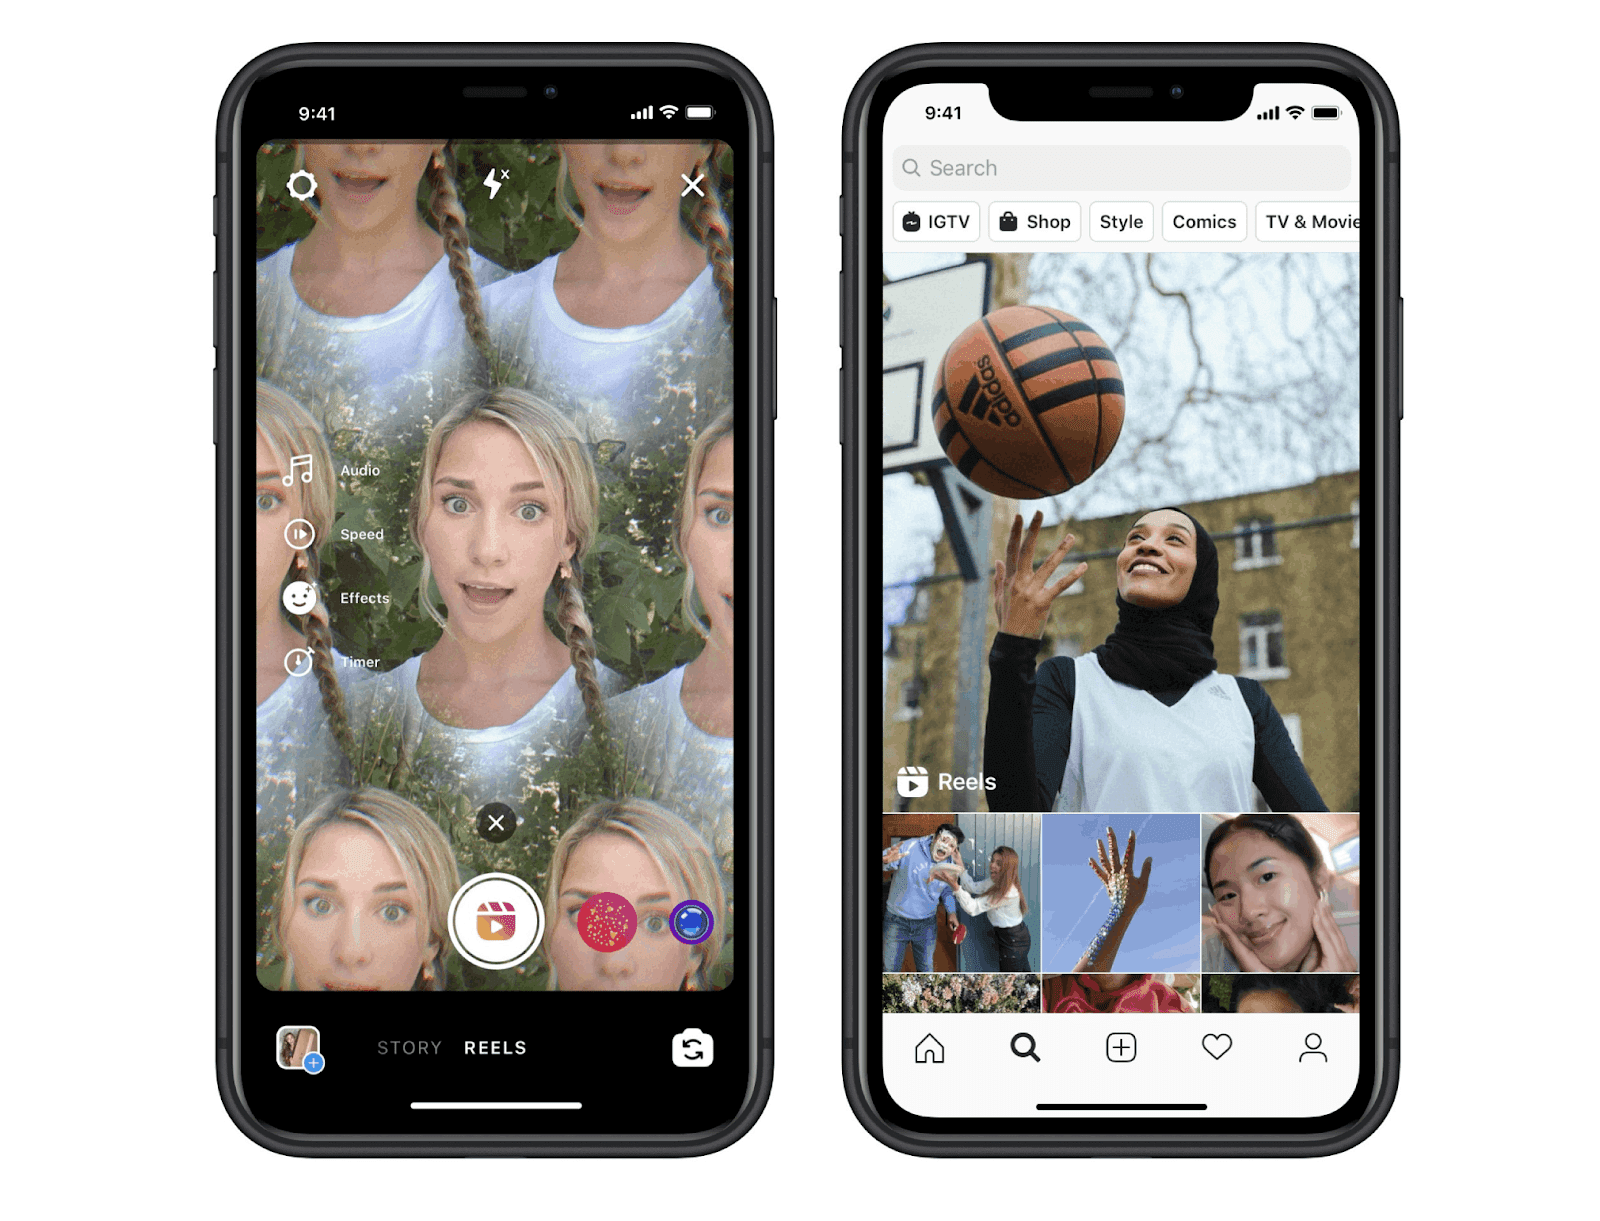 Instagram Expands TikTok Competitor Feature to 50 New Markets